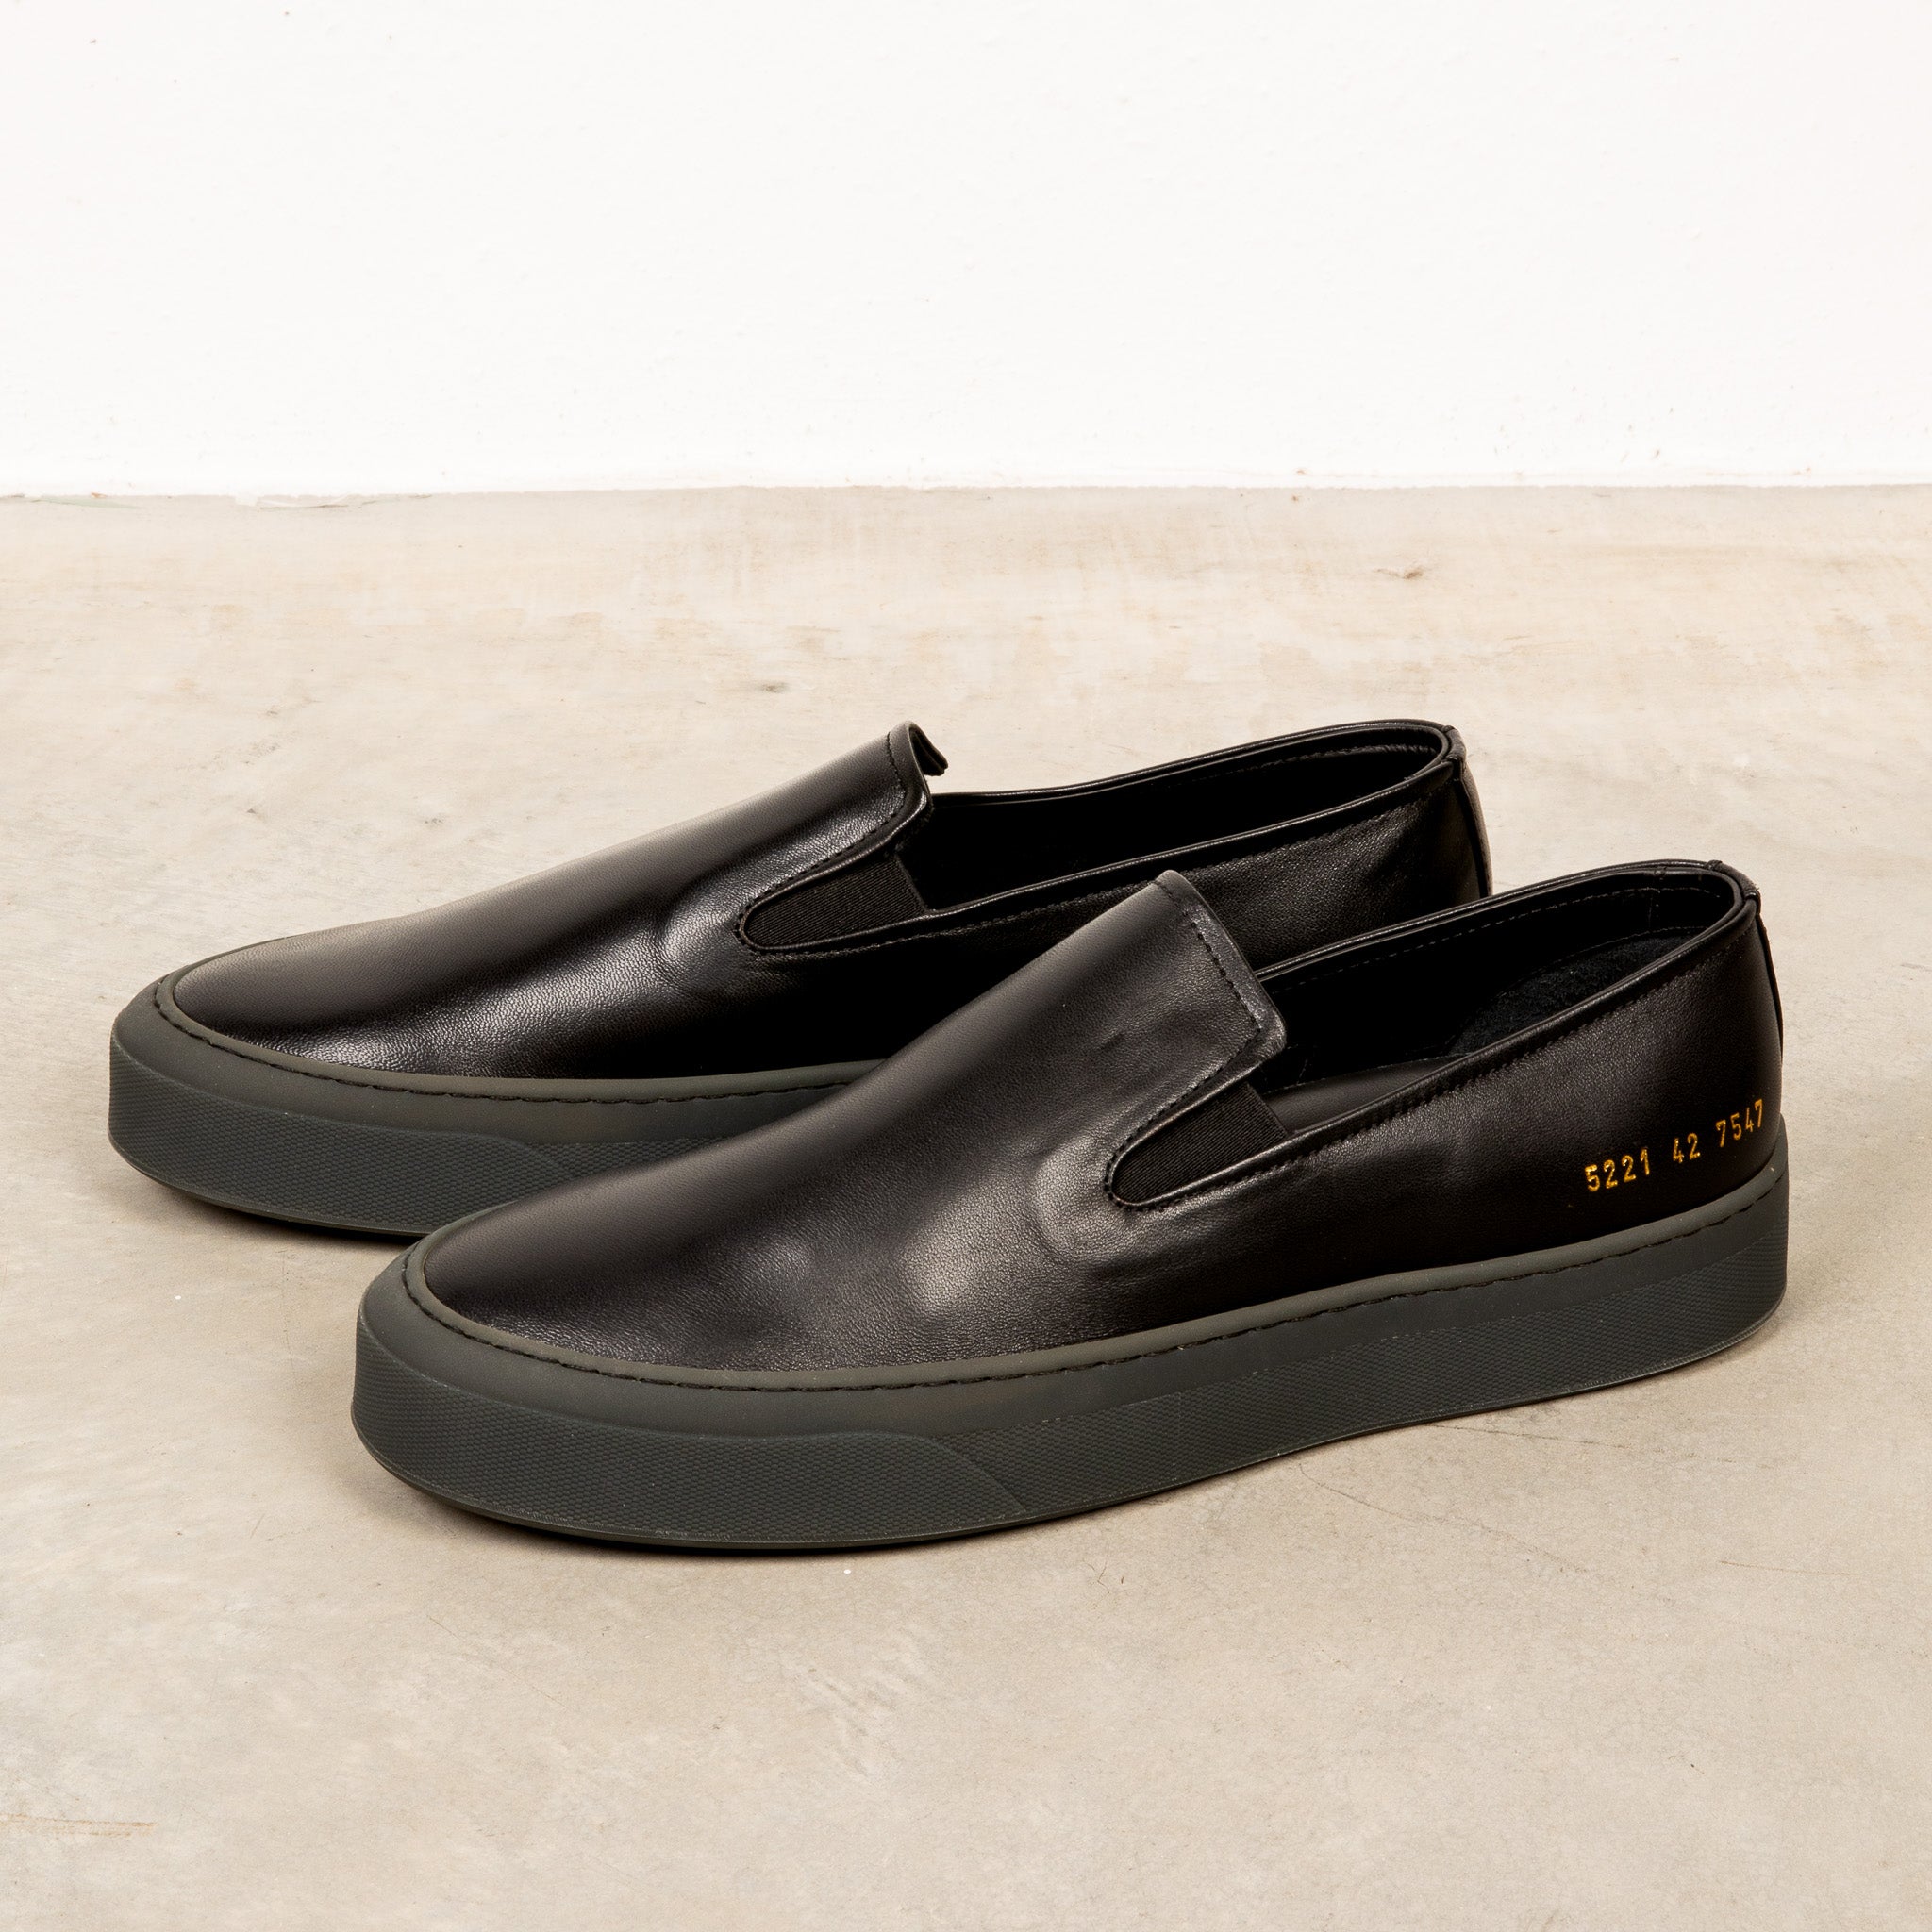 Common Projects Slip-on Black